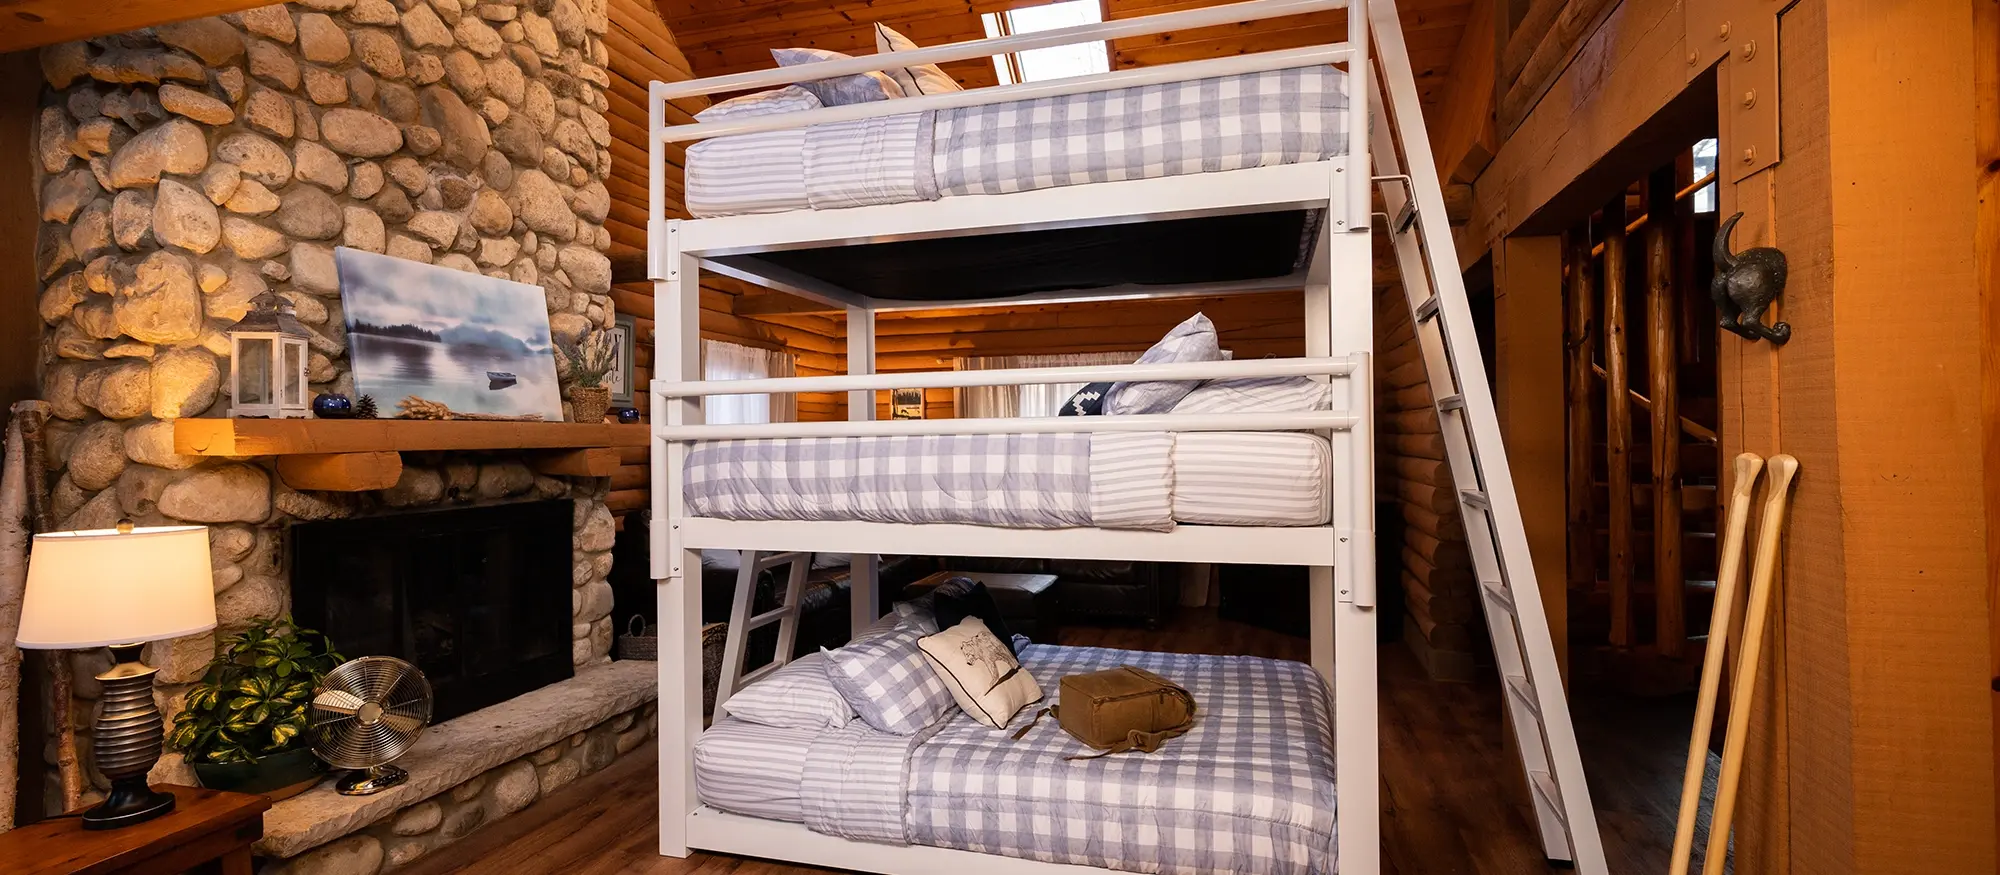 White Queen Triple Bunk Bed in a Cabin seen from a wide angle at the left-hand side of the bed.